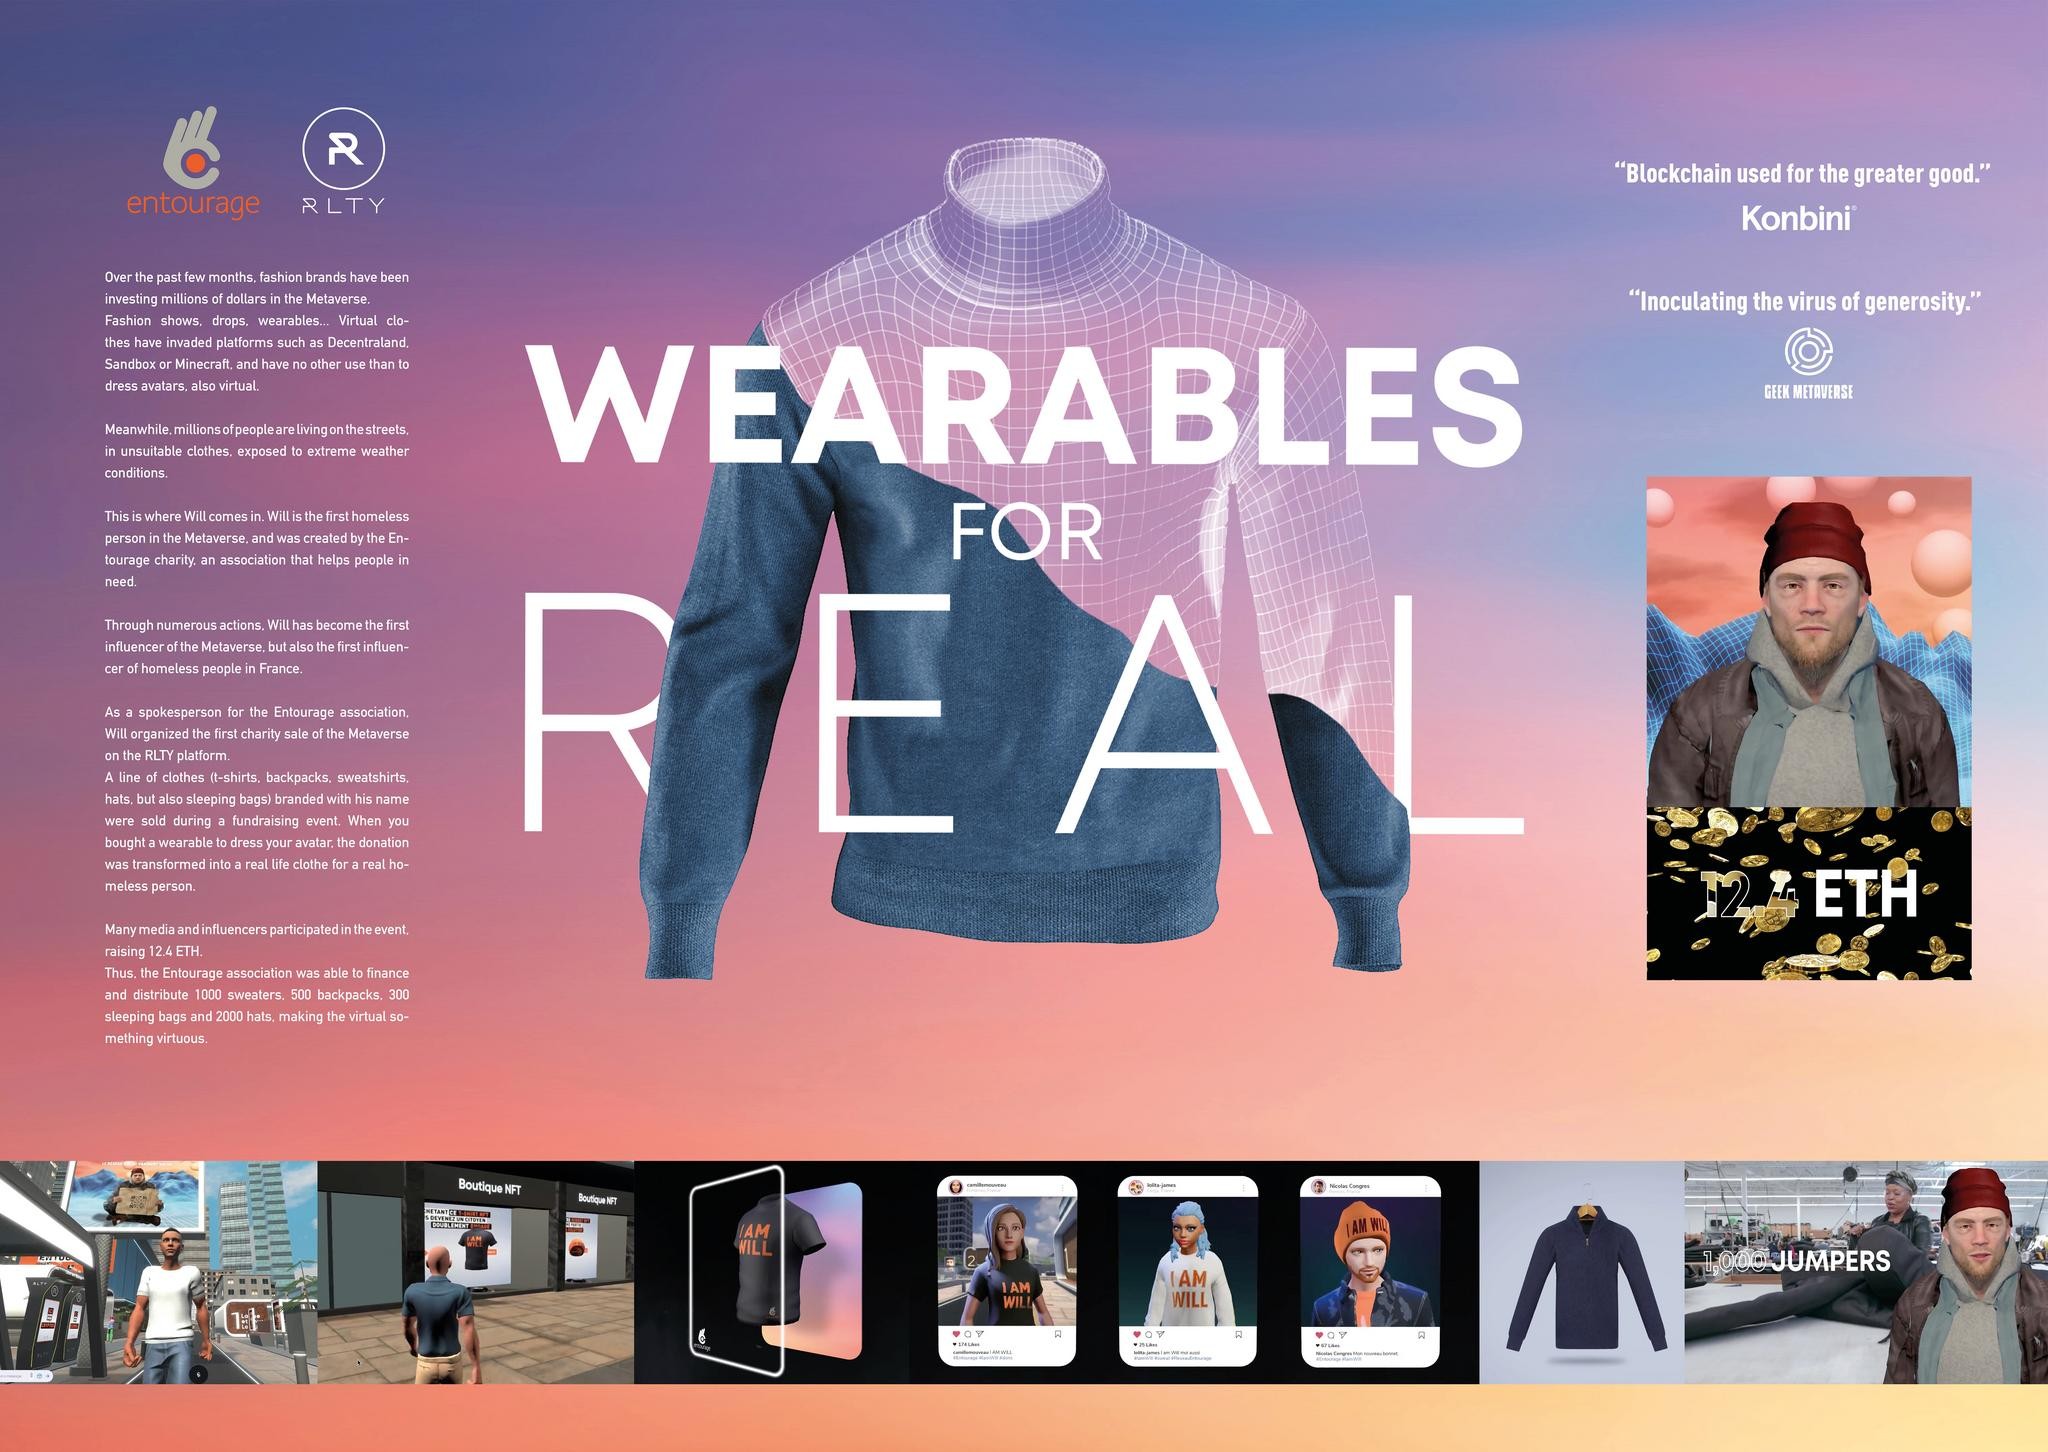 Wearables for real